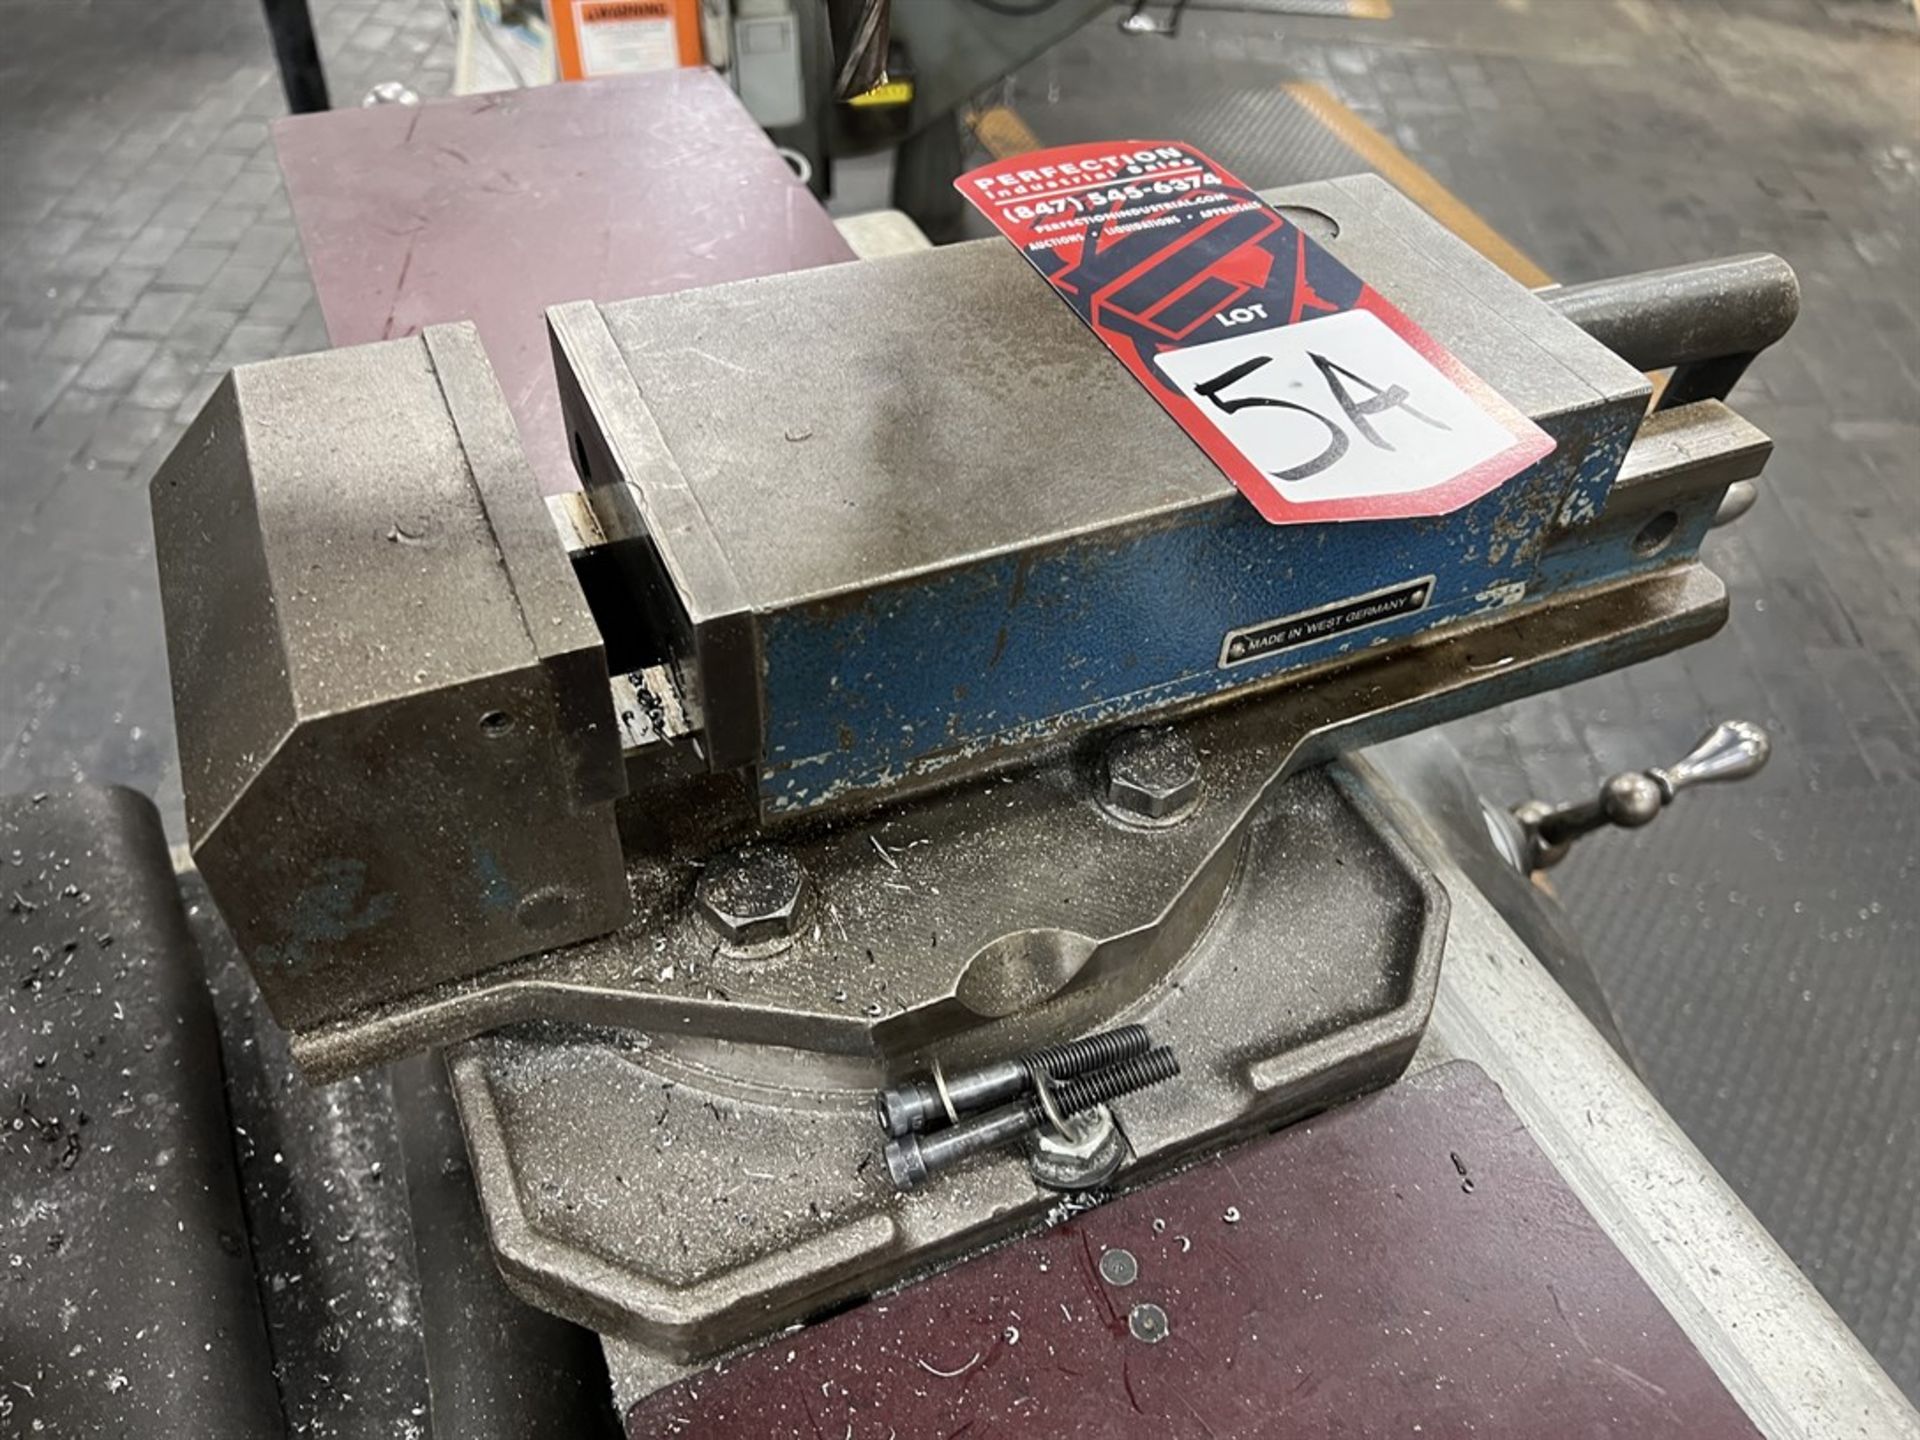 HILMA 5" Machine Vise (A rigging cost of $25.00 will be added to the winning bidders invoice)